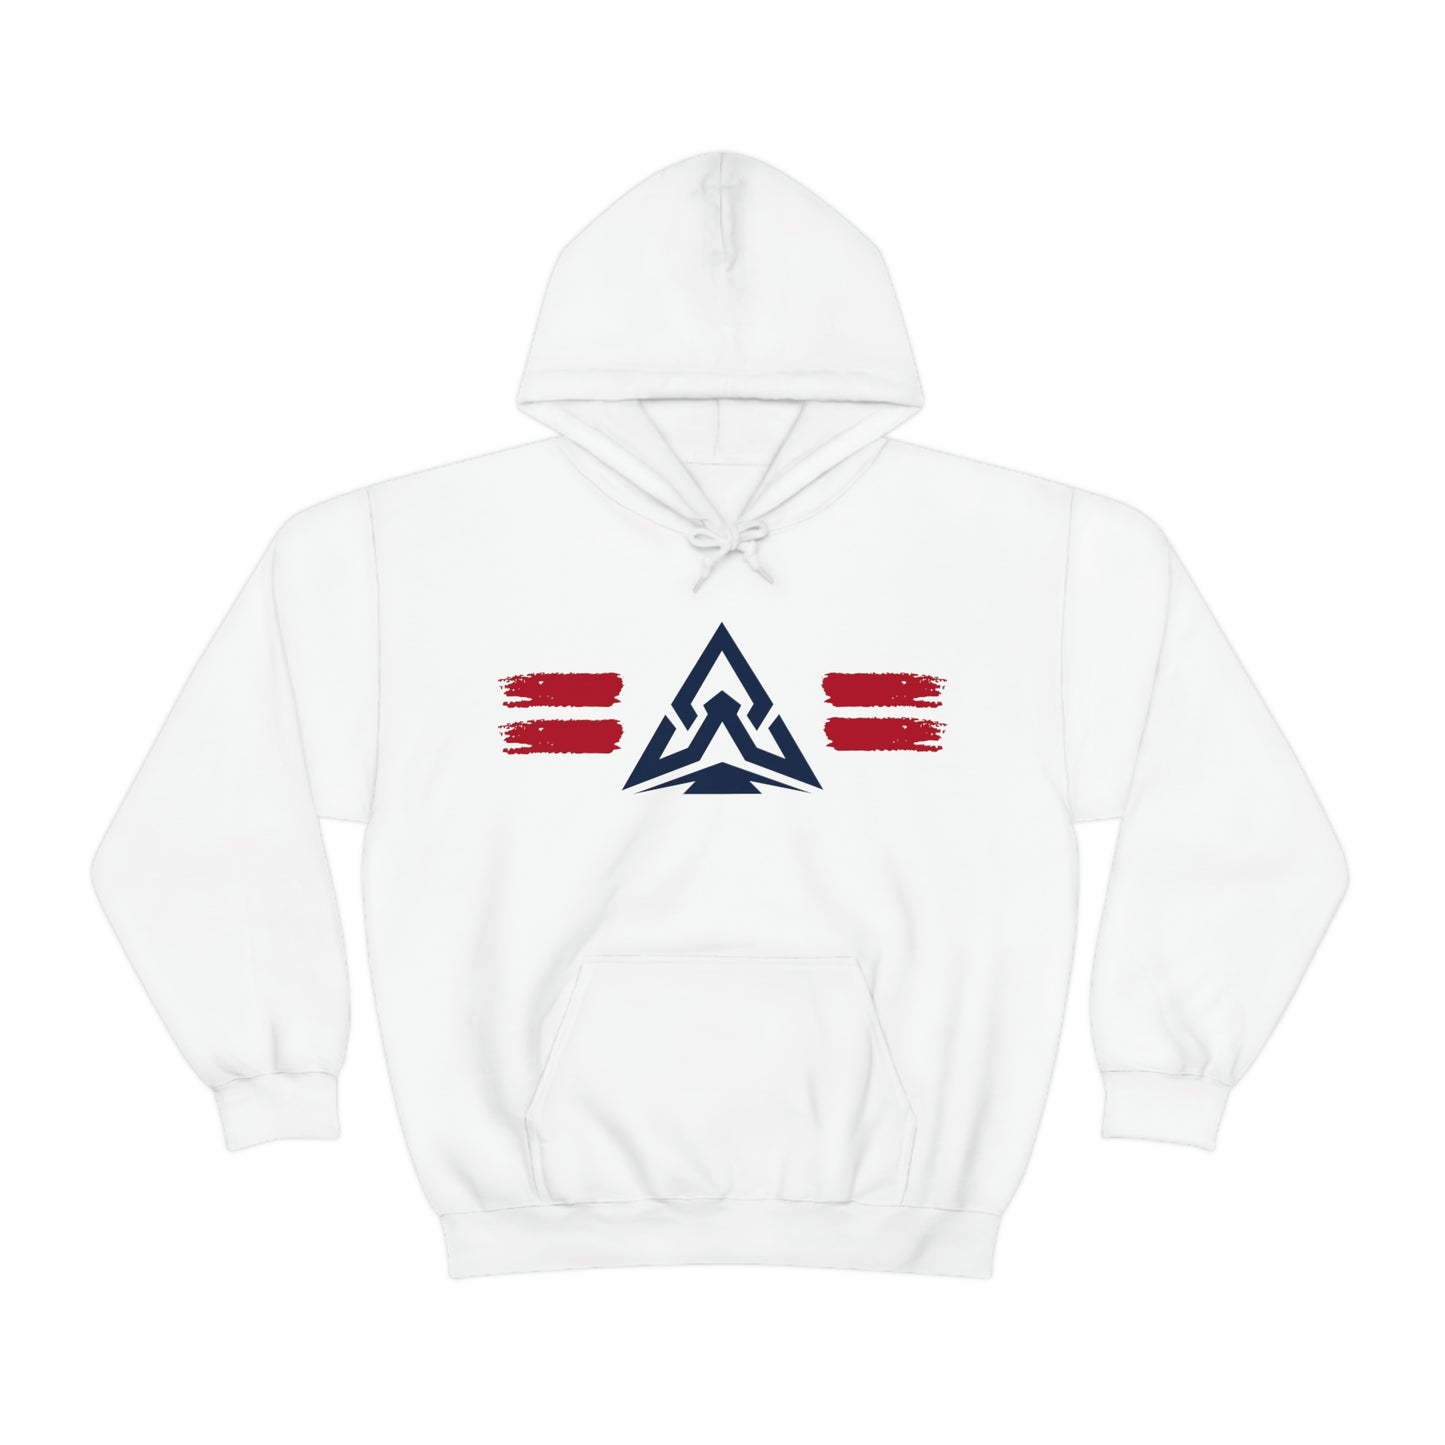 Andy Whittier Team Colors Hoodie